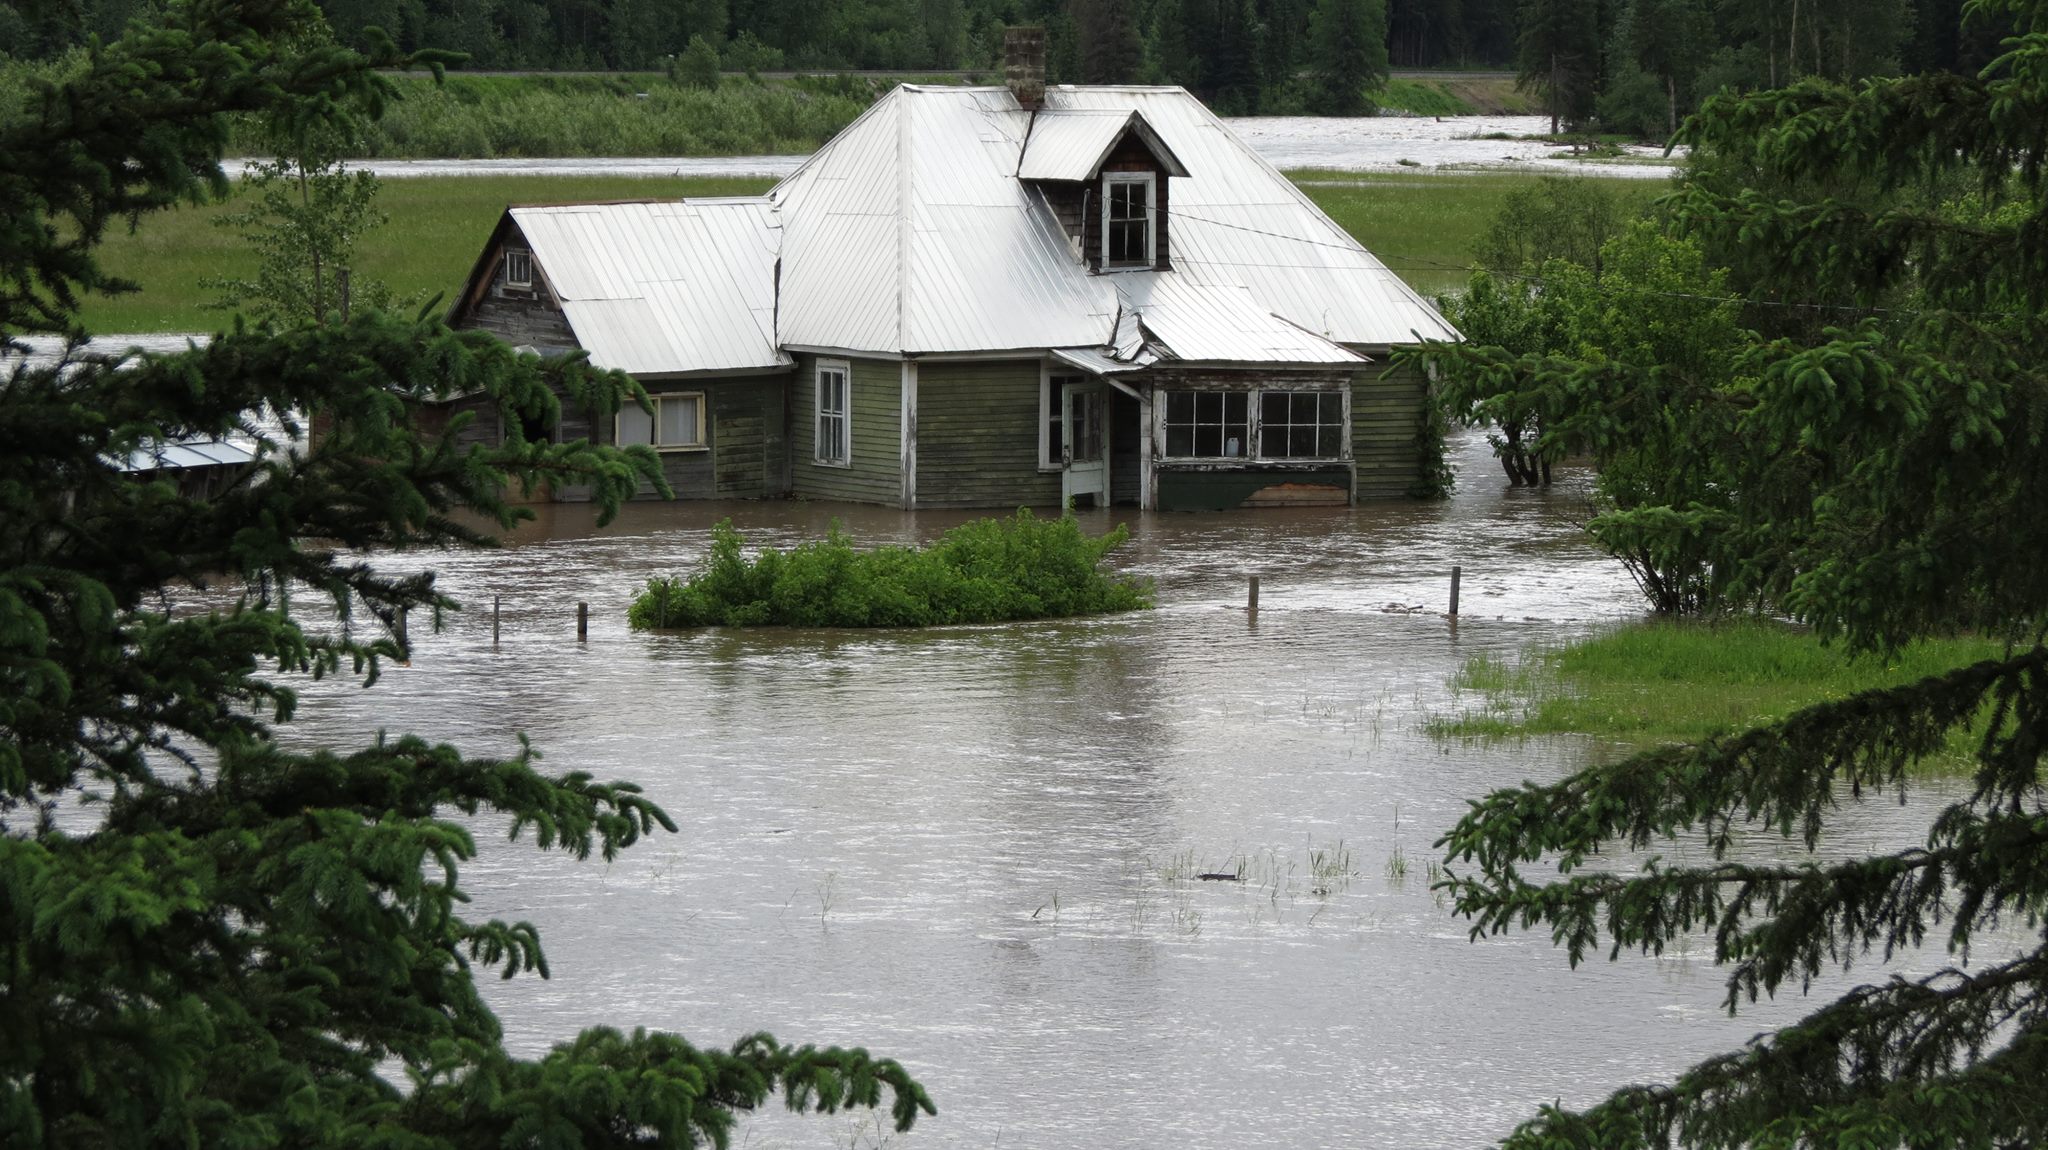 There has been 1 in 100 years flood in Fernie - Photo - Freepress